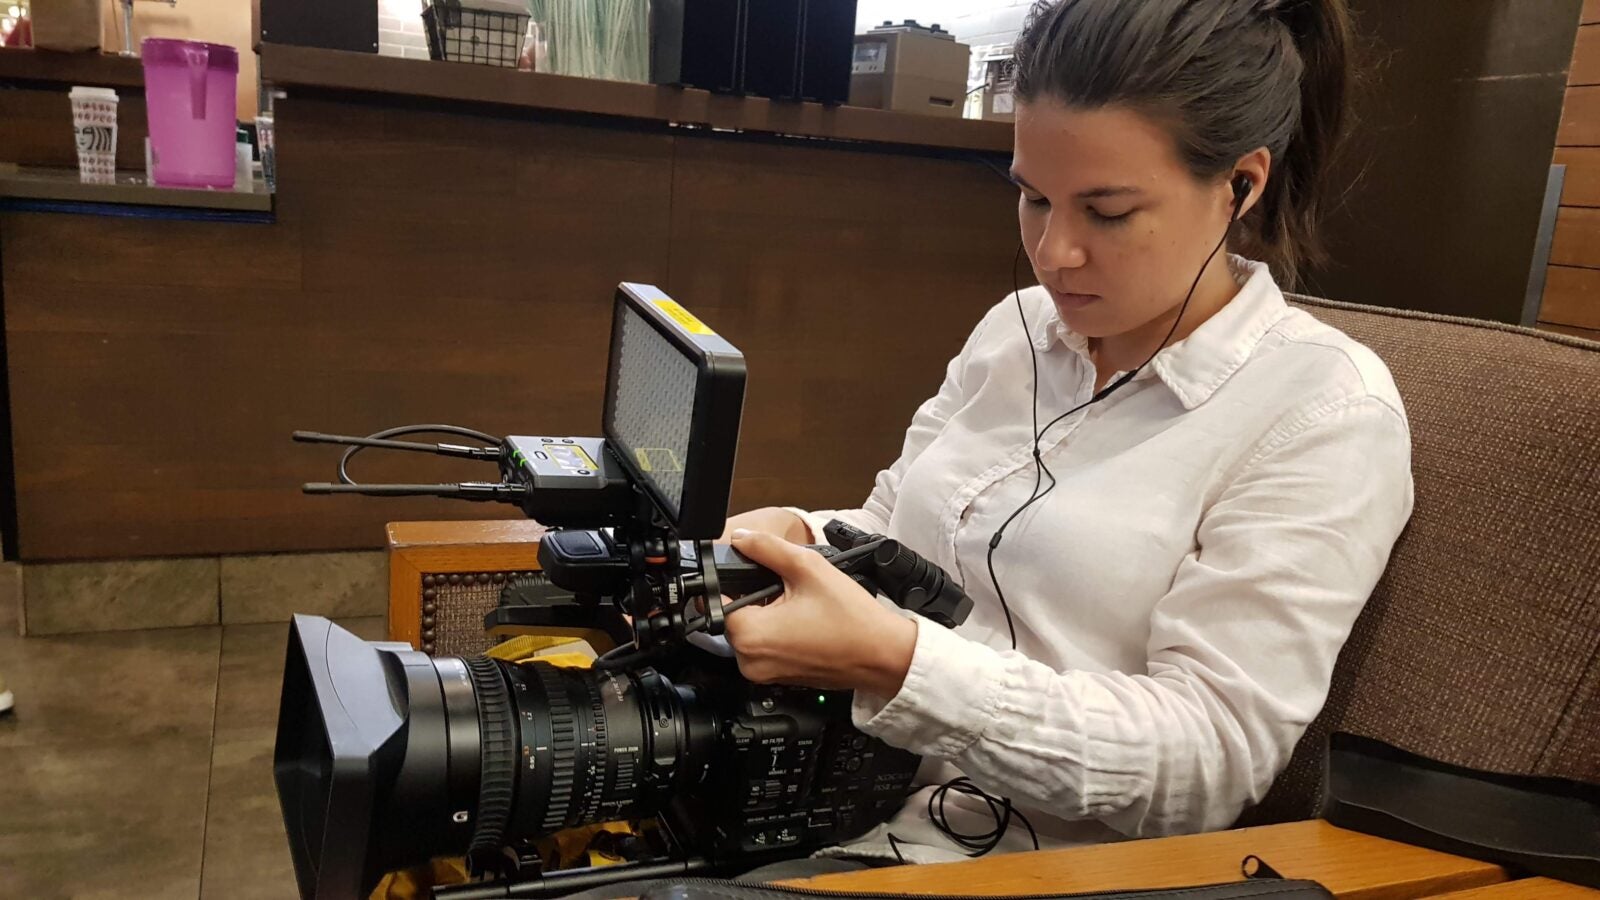 A Swiss-Malaysian Woman sitting on a low chair in a cafe, with earphones on and a huge recording camera on her lap. She is looking down, focusing on the recording camera.